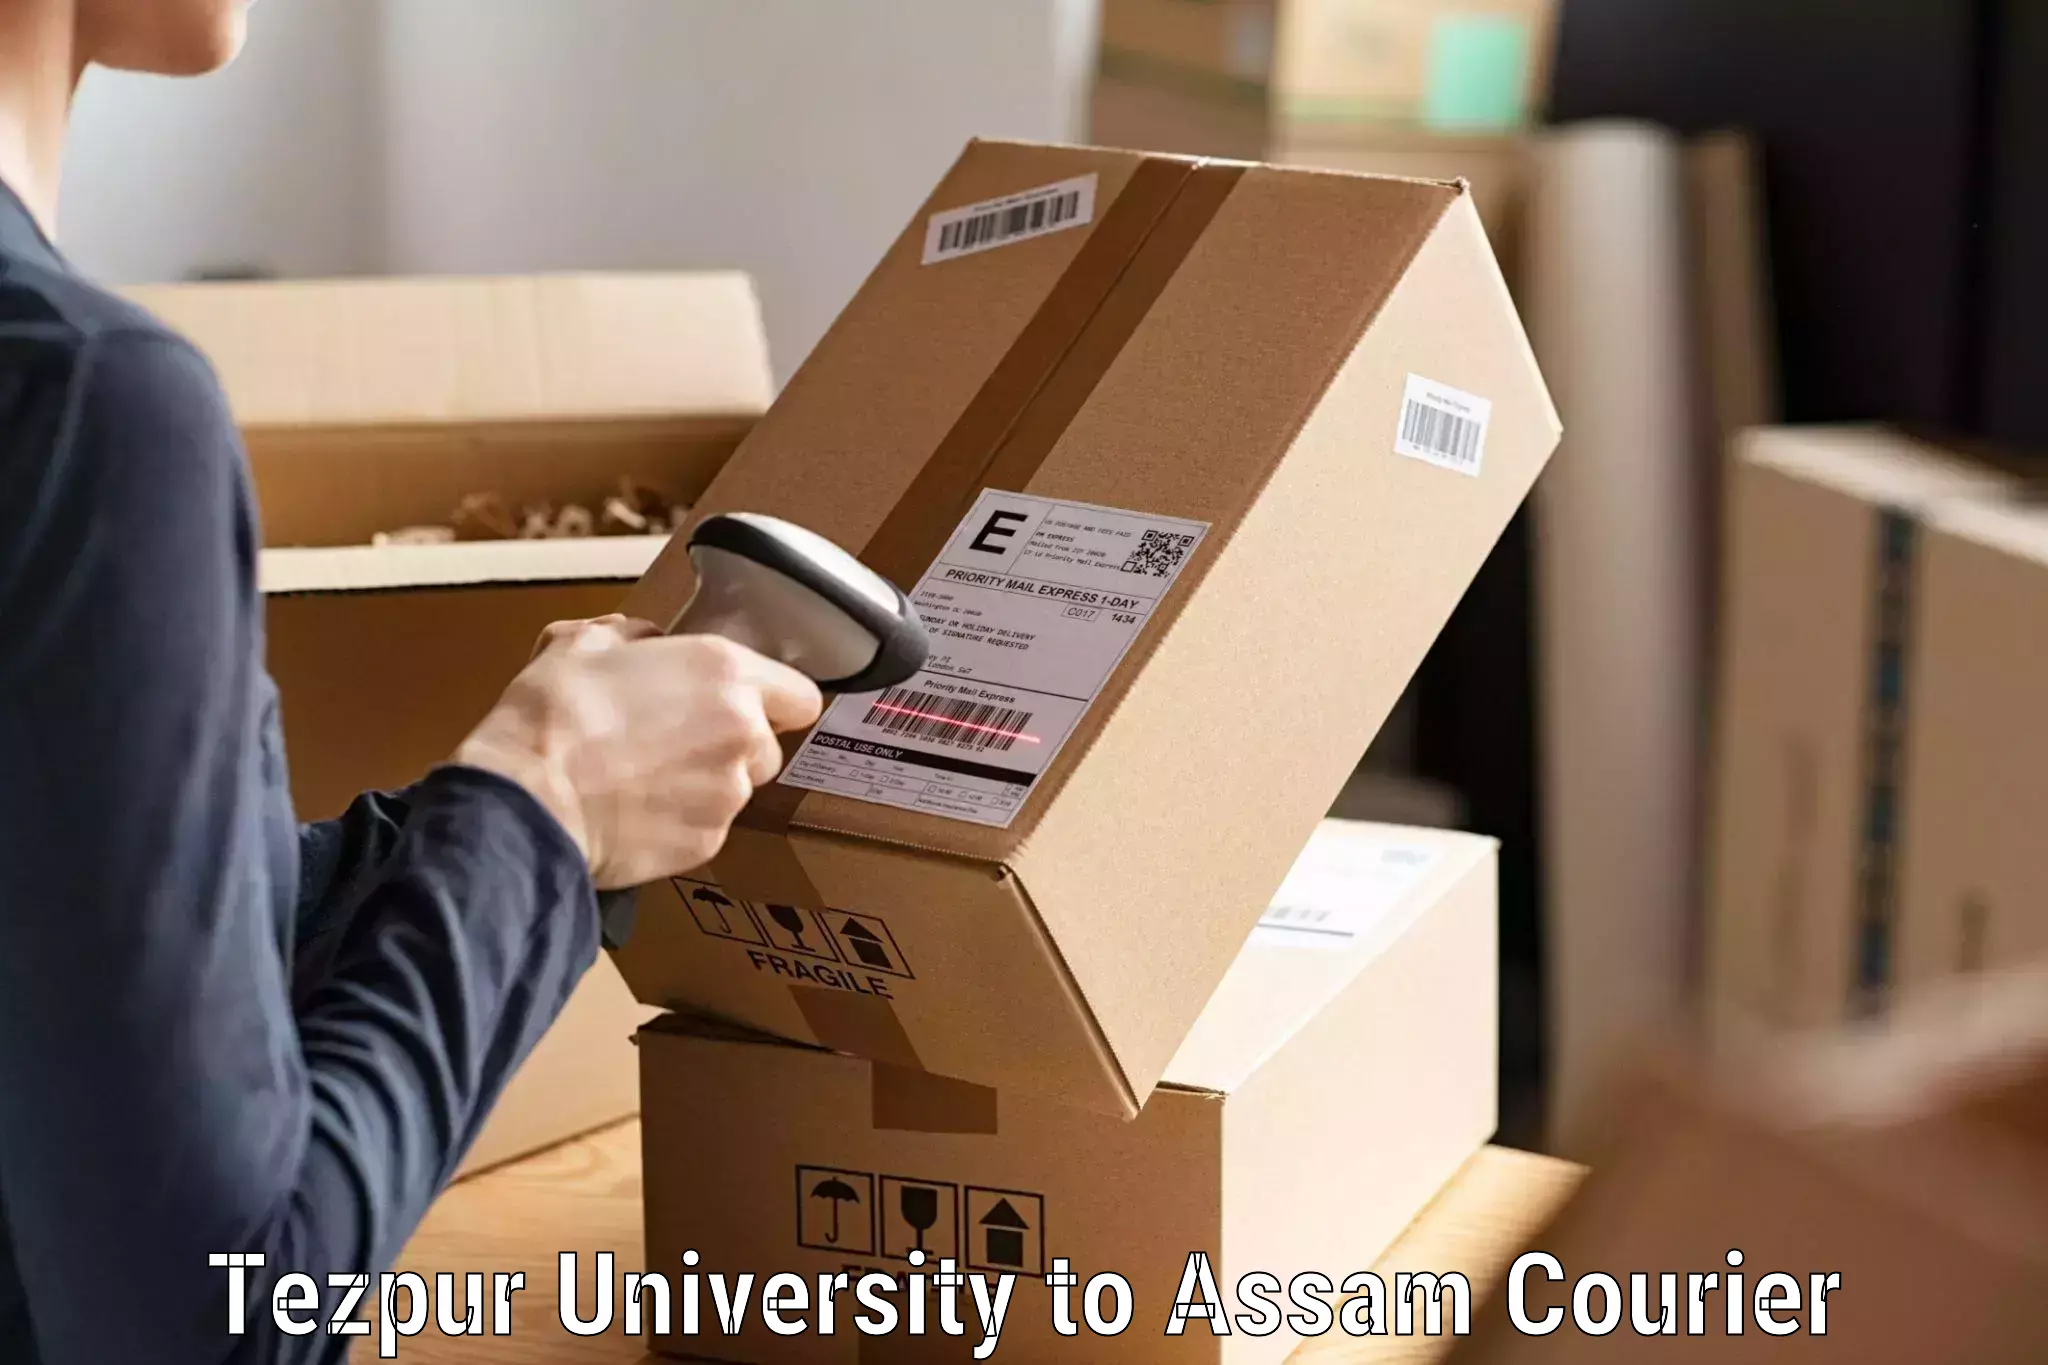 Nationwide delivery network Tezpur University to Golaghat